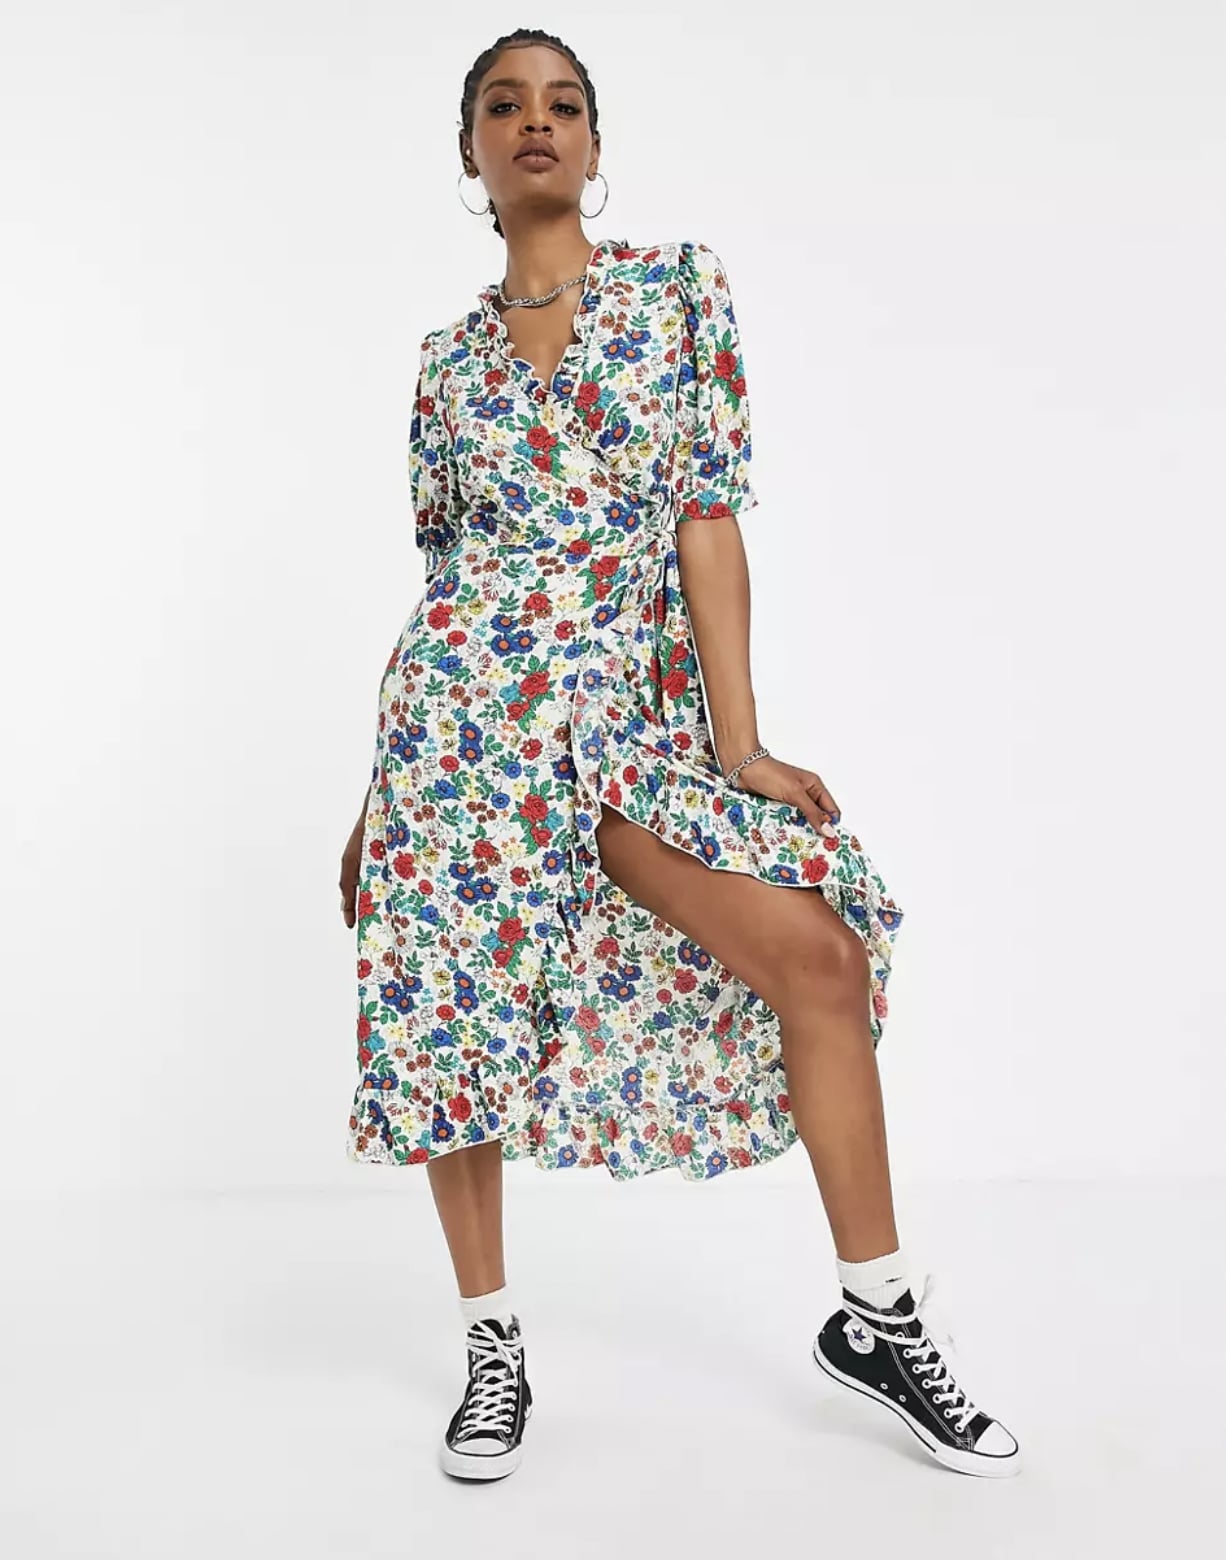 For Daytime Wear: Topshop Tall Printed Floral Midi Dress, 13 Printed Midi  Dresses That Deserve a Spot in Your Closet